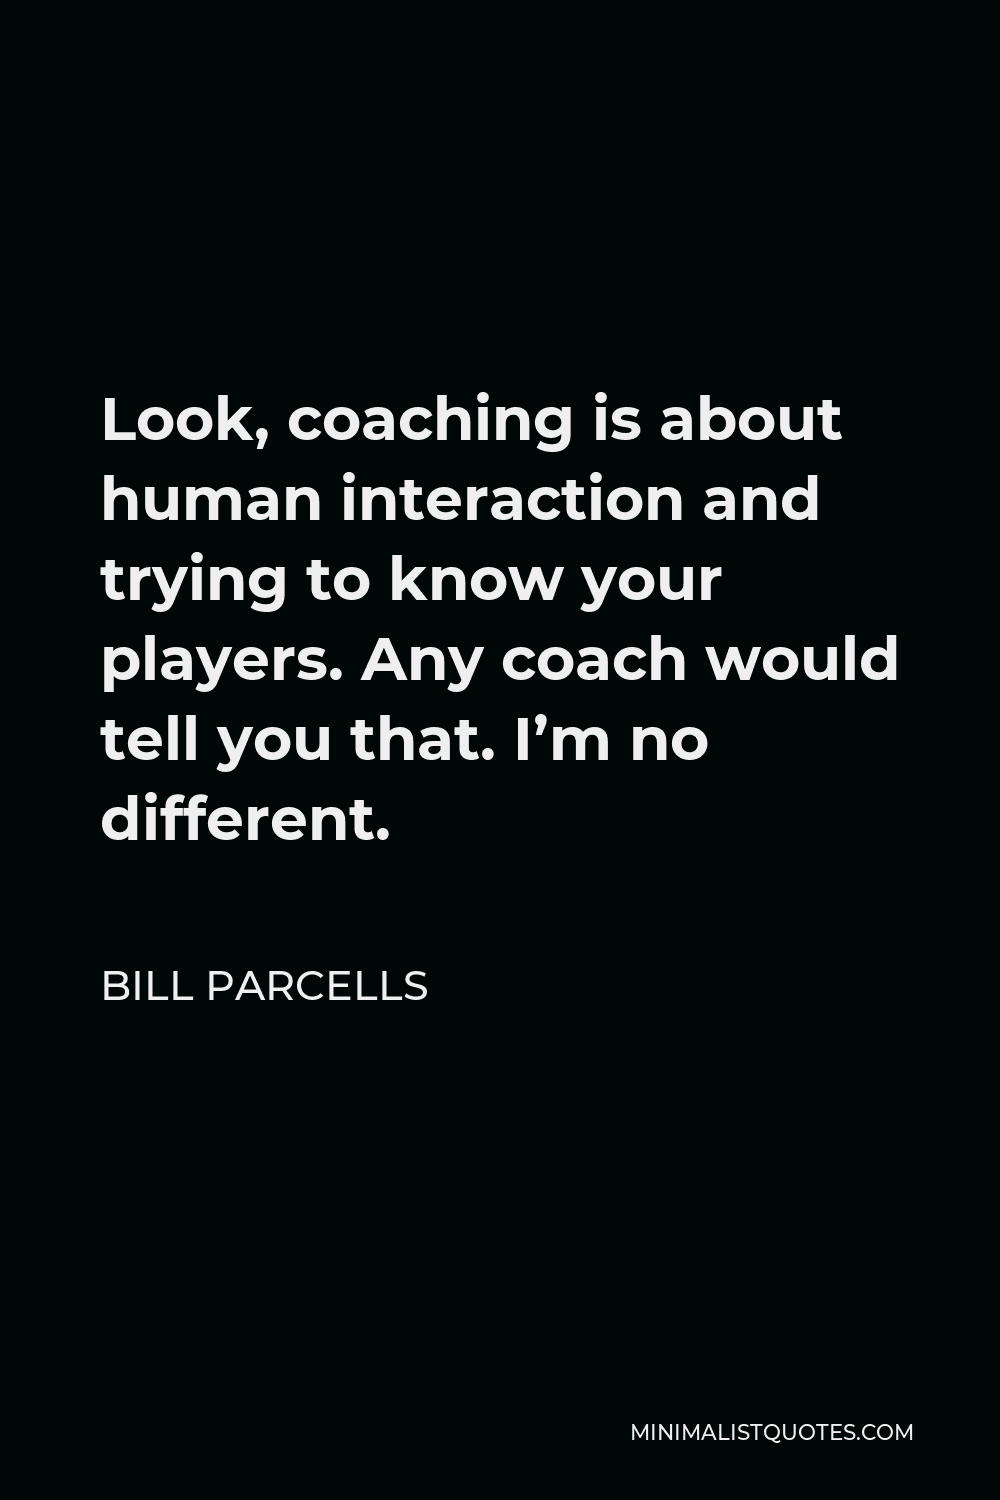 Bill Parcells Quote - Look, coaching is about human interaction and trying to know your players. Any coach would tell you that. I’m no different.